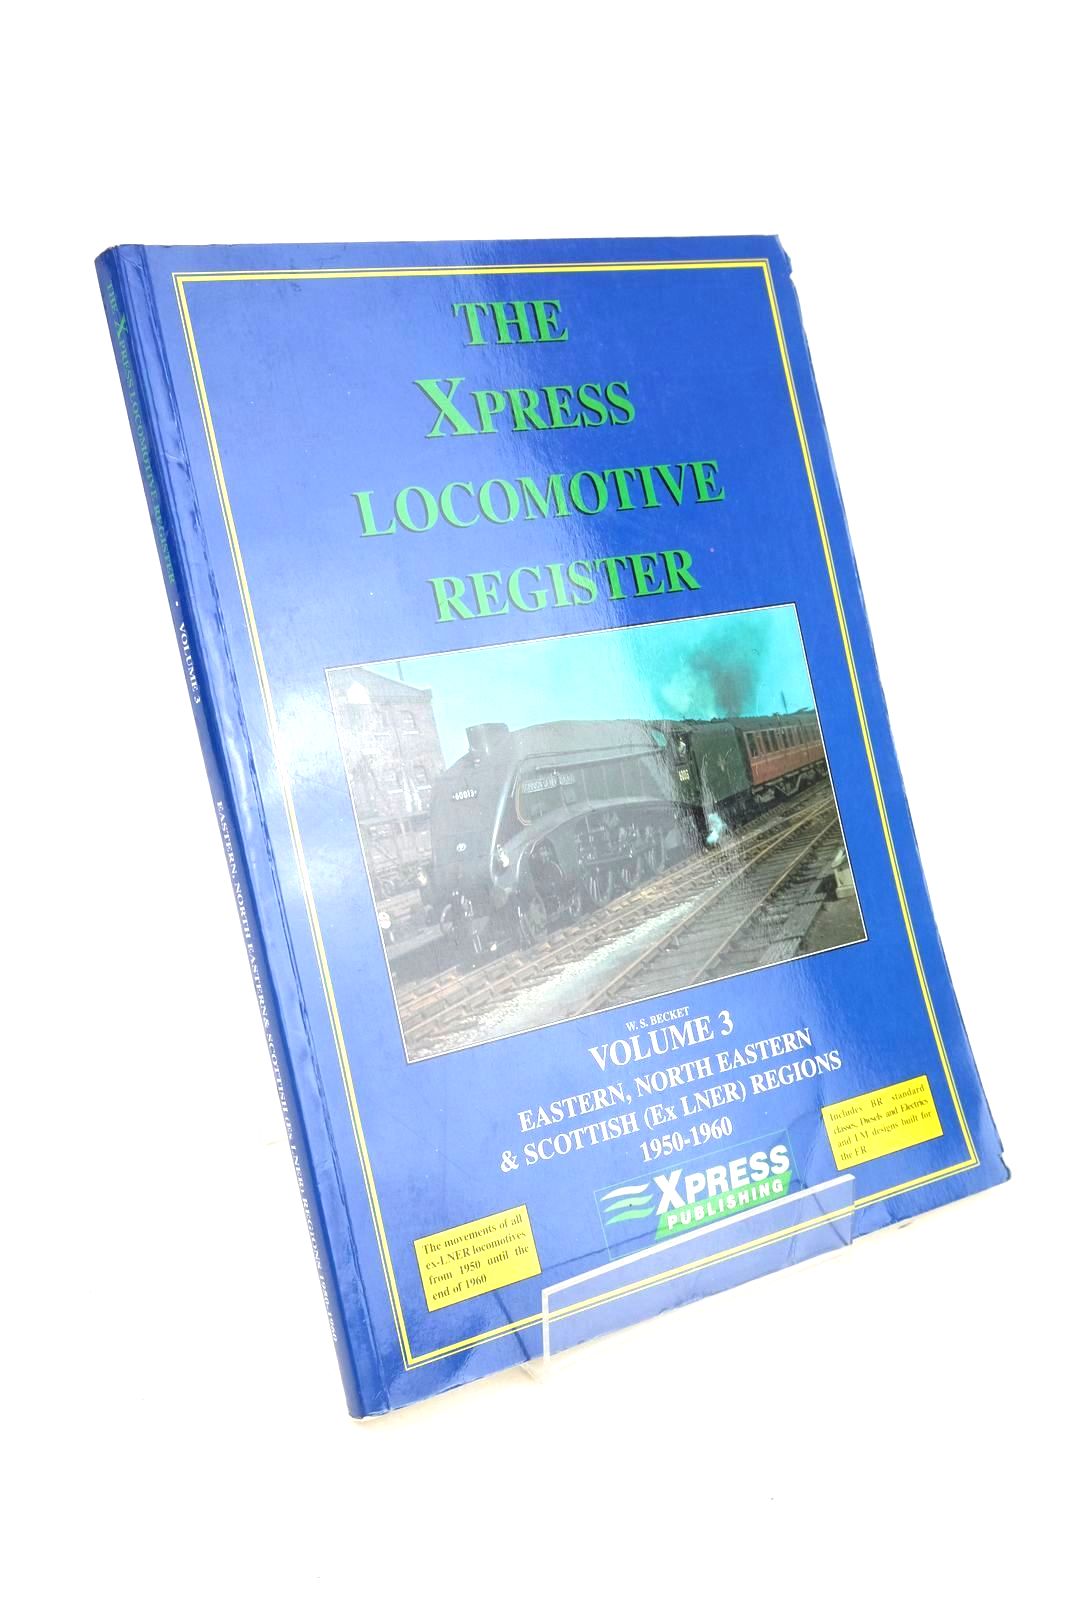 Photo of THE XPRESS LOCOMOTIVE REGISTER VOLUME 3 written by Becket, W.S. published by Xpress Publising (STOCK CODE: 1327228)  for sale by Stella & Rose's Books